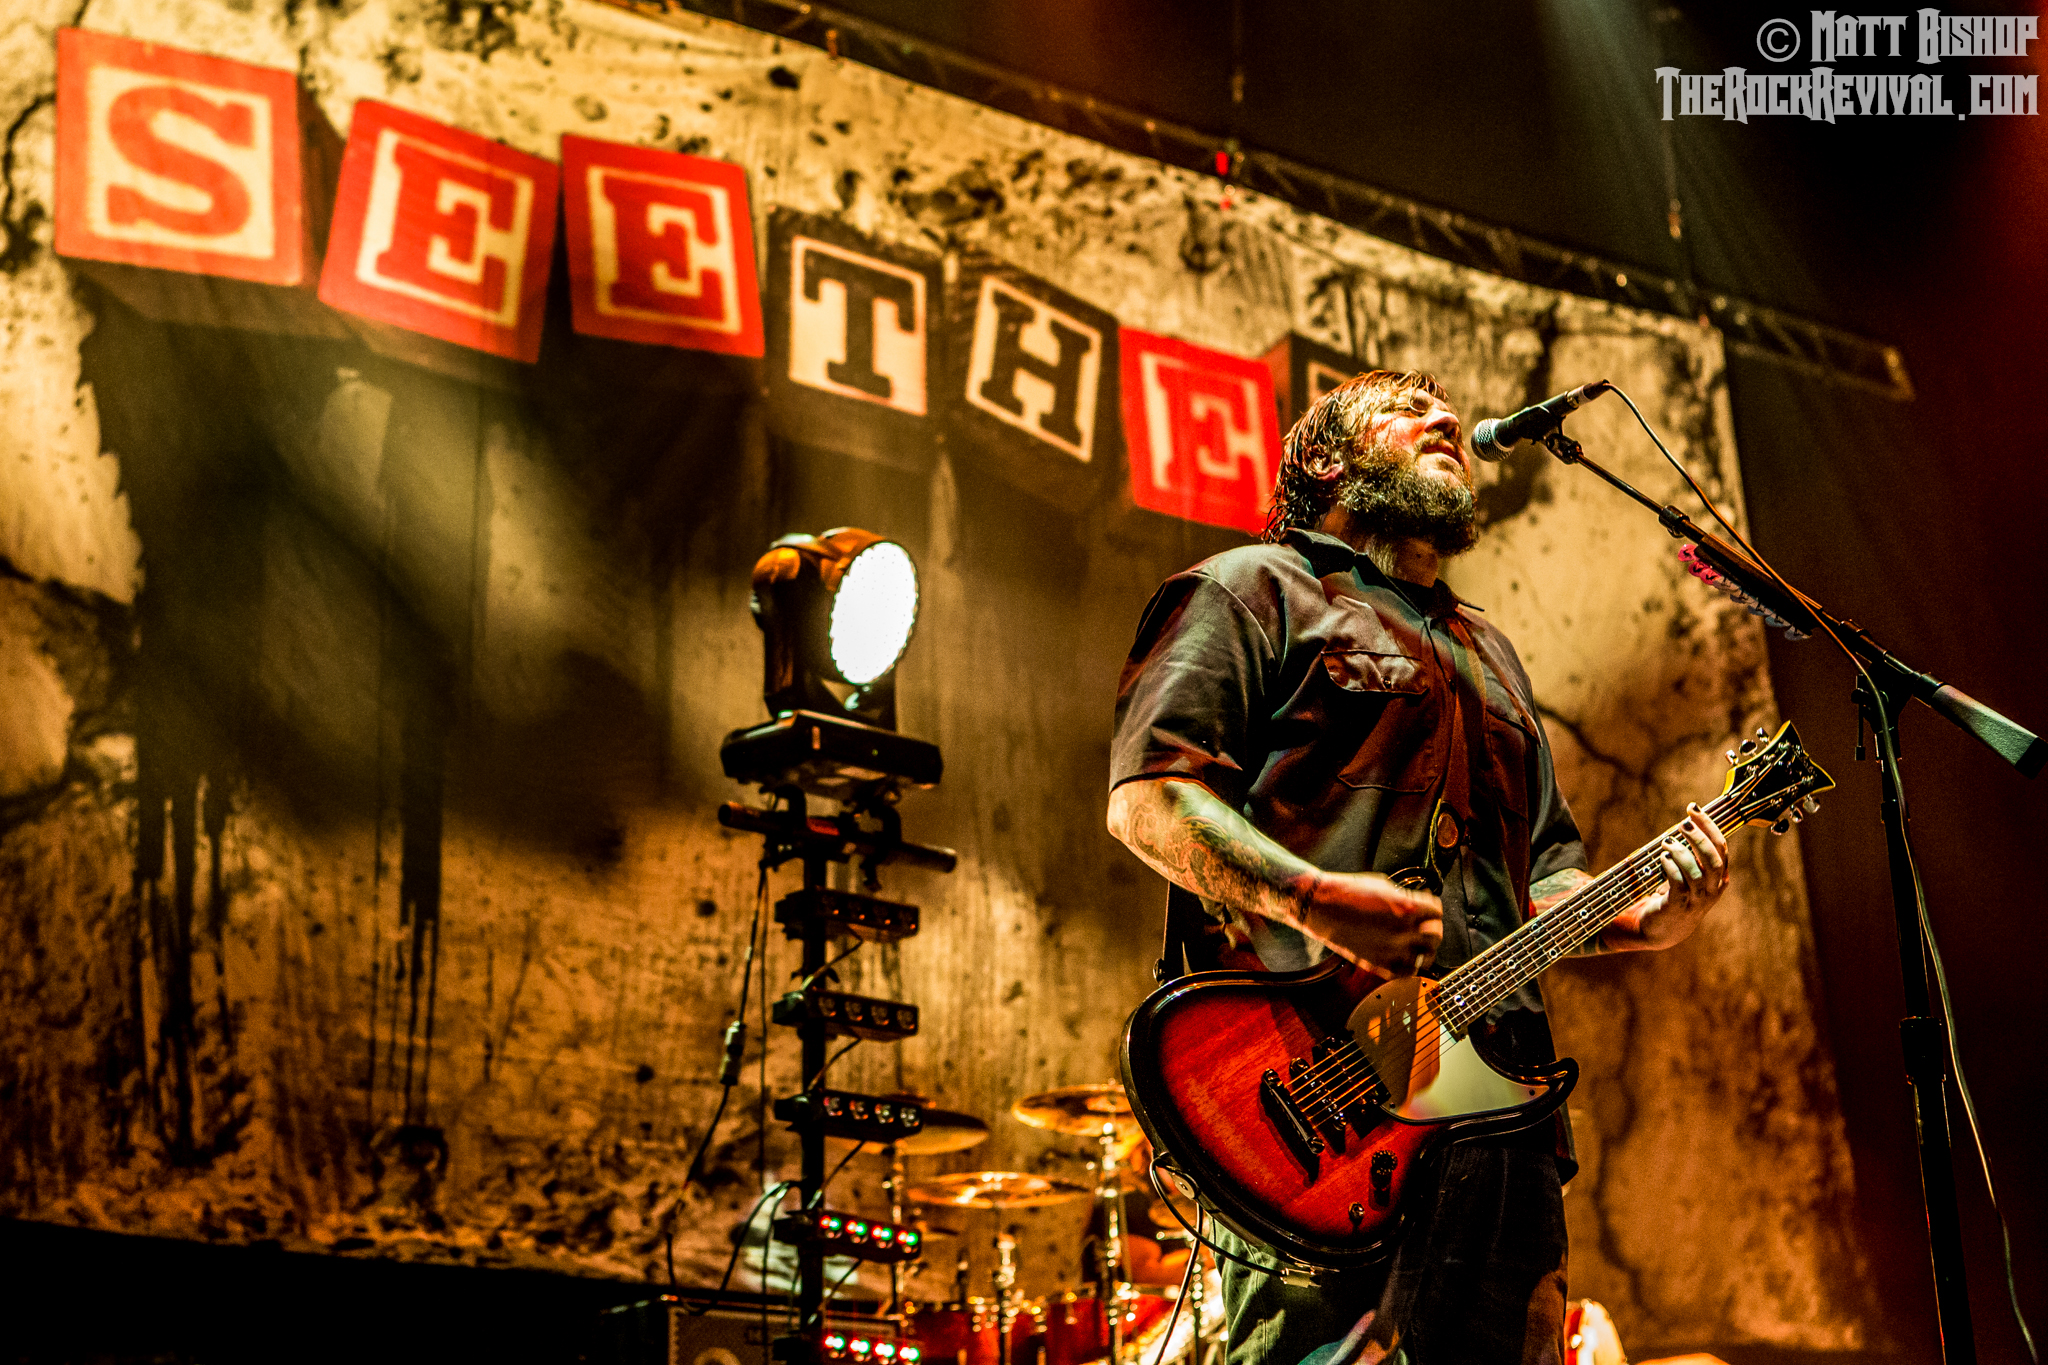 SEETHER – Live Photo Gallery